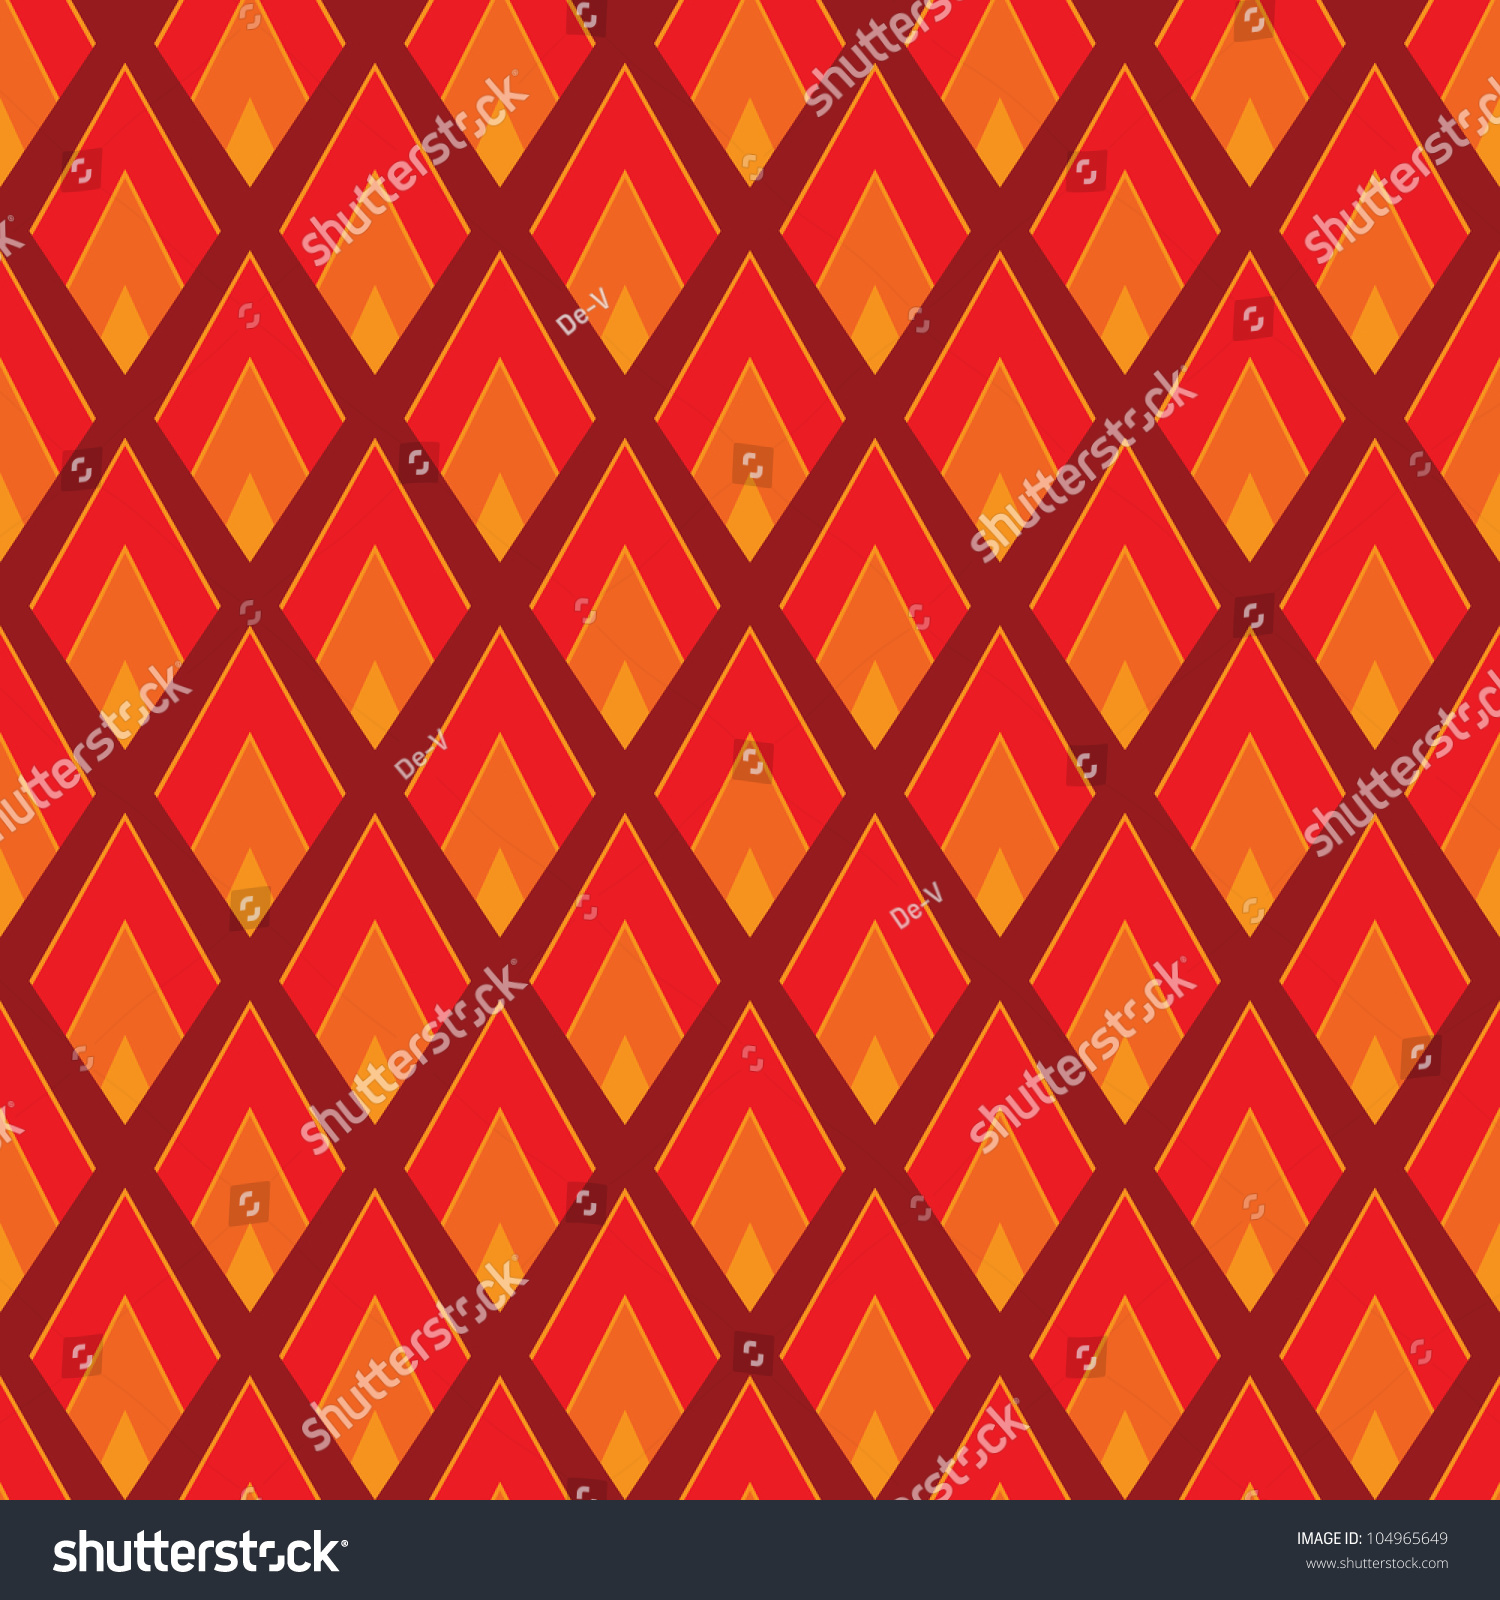 Abstract Fabric Vector Seamless Background. Vector Illustration